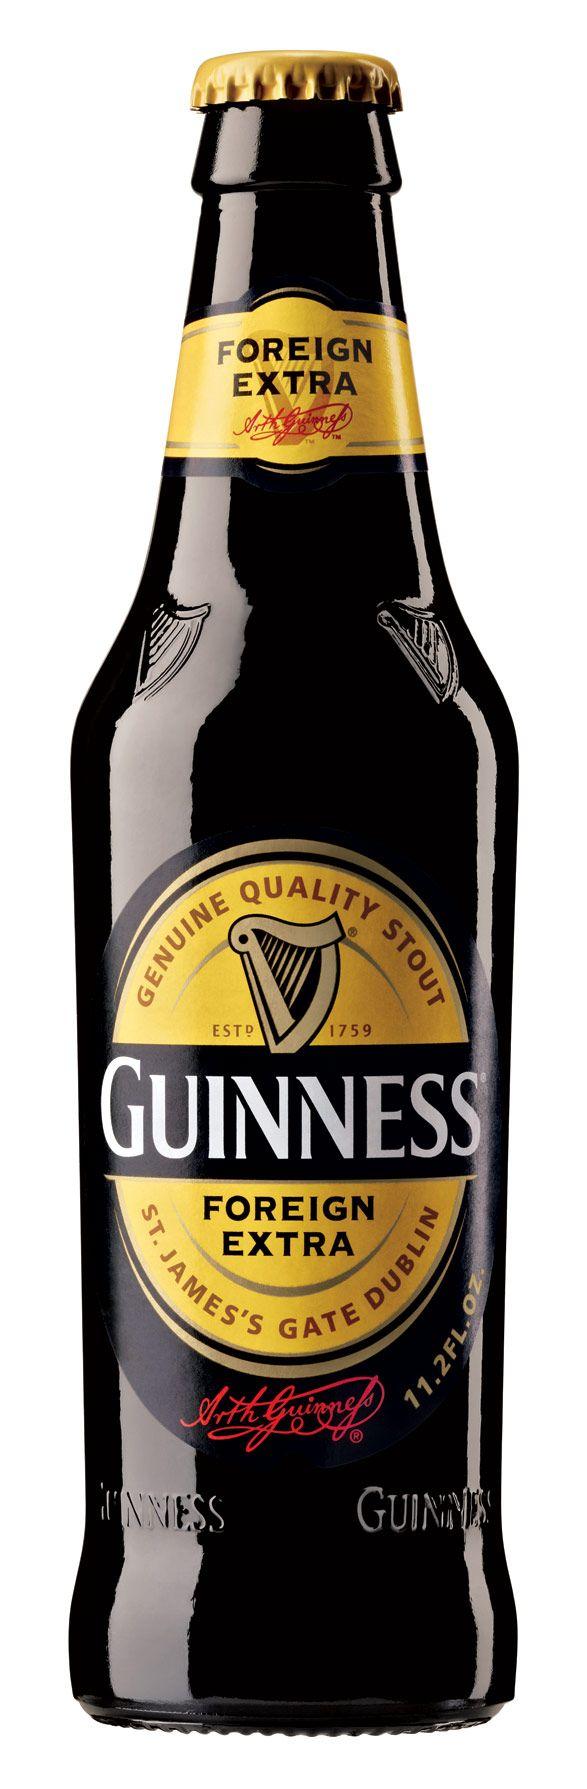 Guinness Bottle Logo - Pin by Patrick Cates on Beer | Pinterest | Beer, Guinness and ...